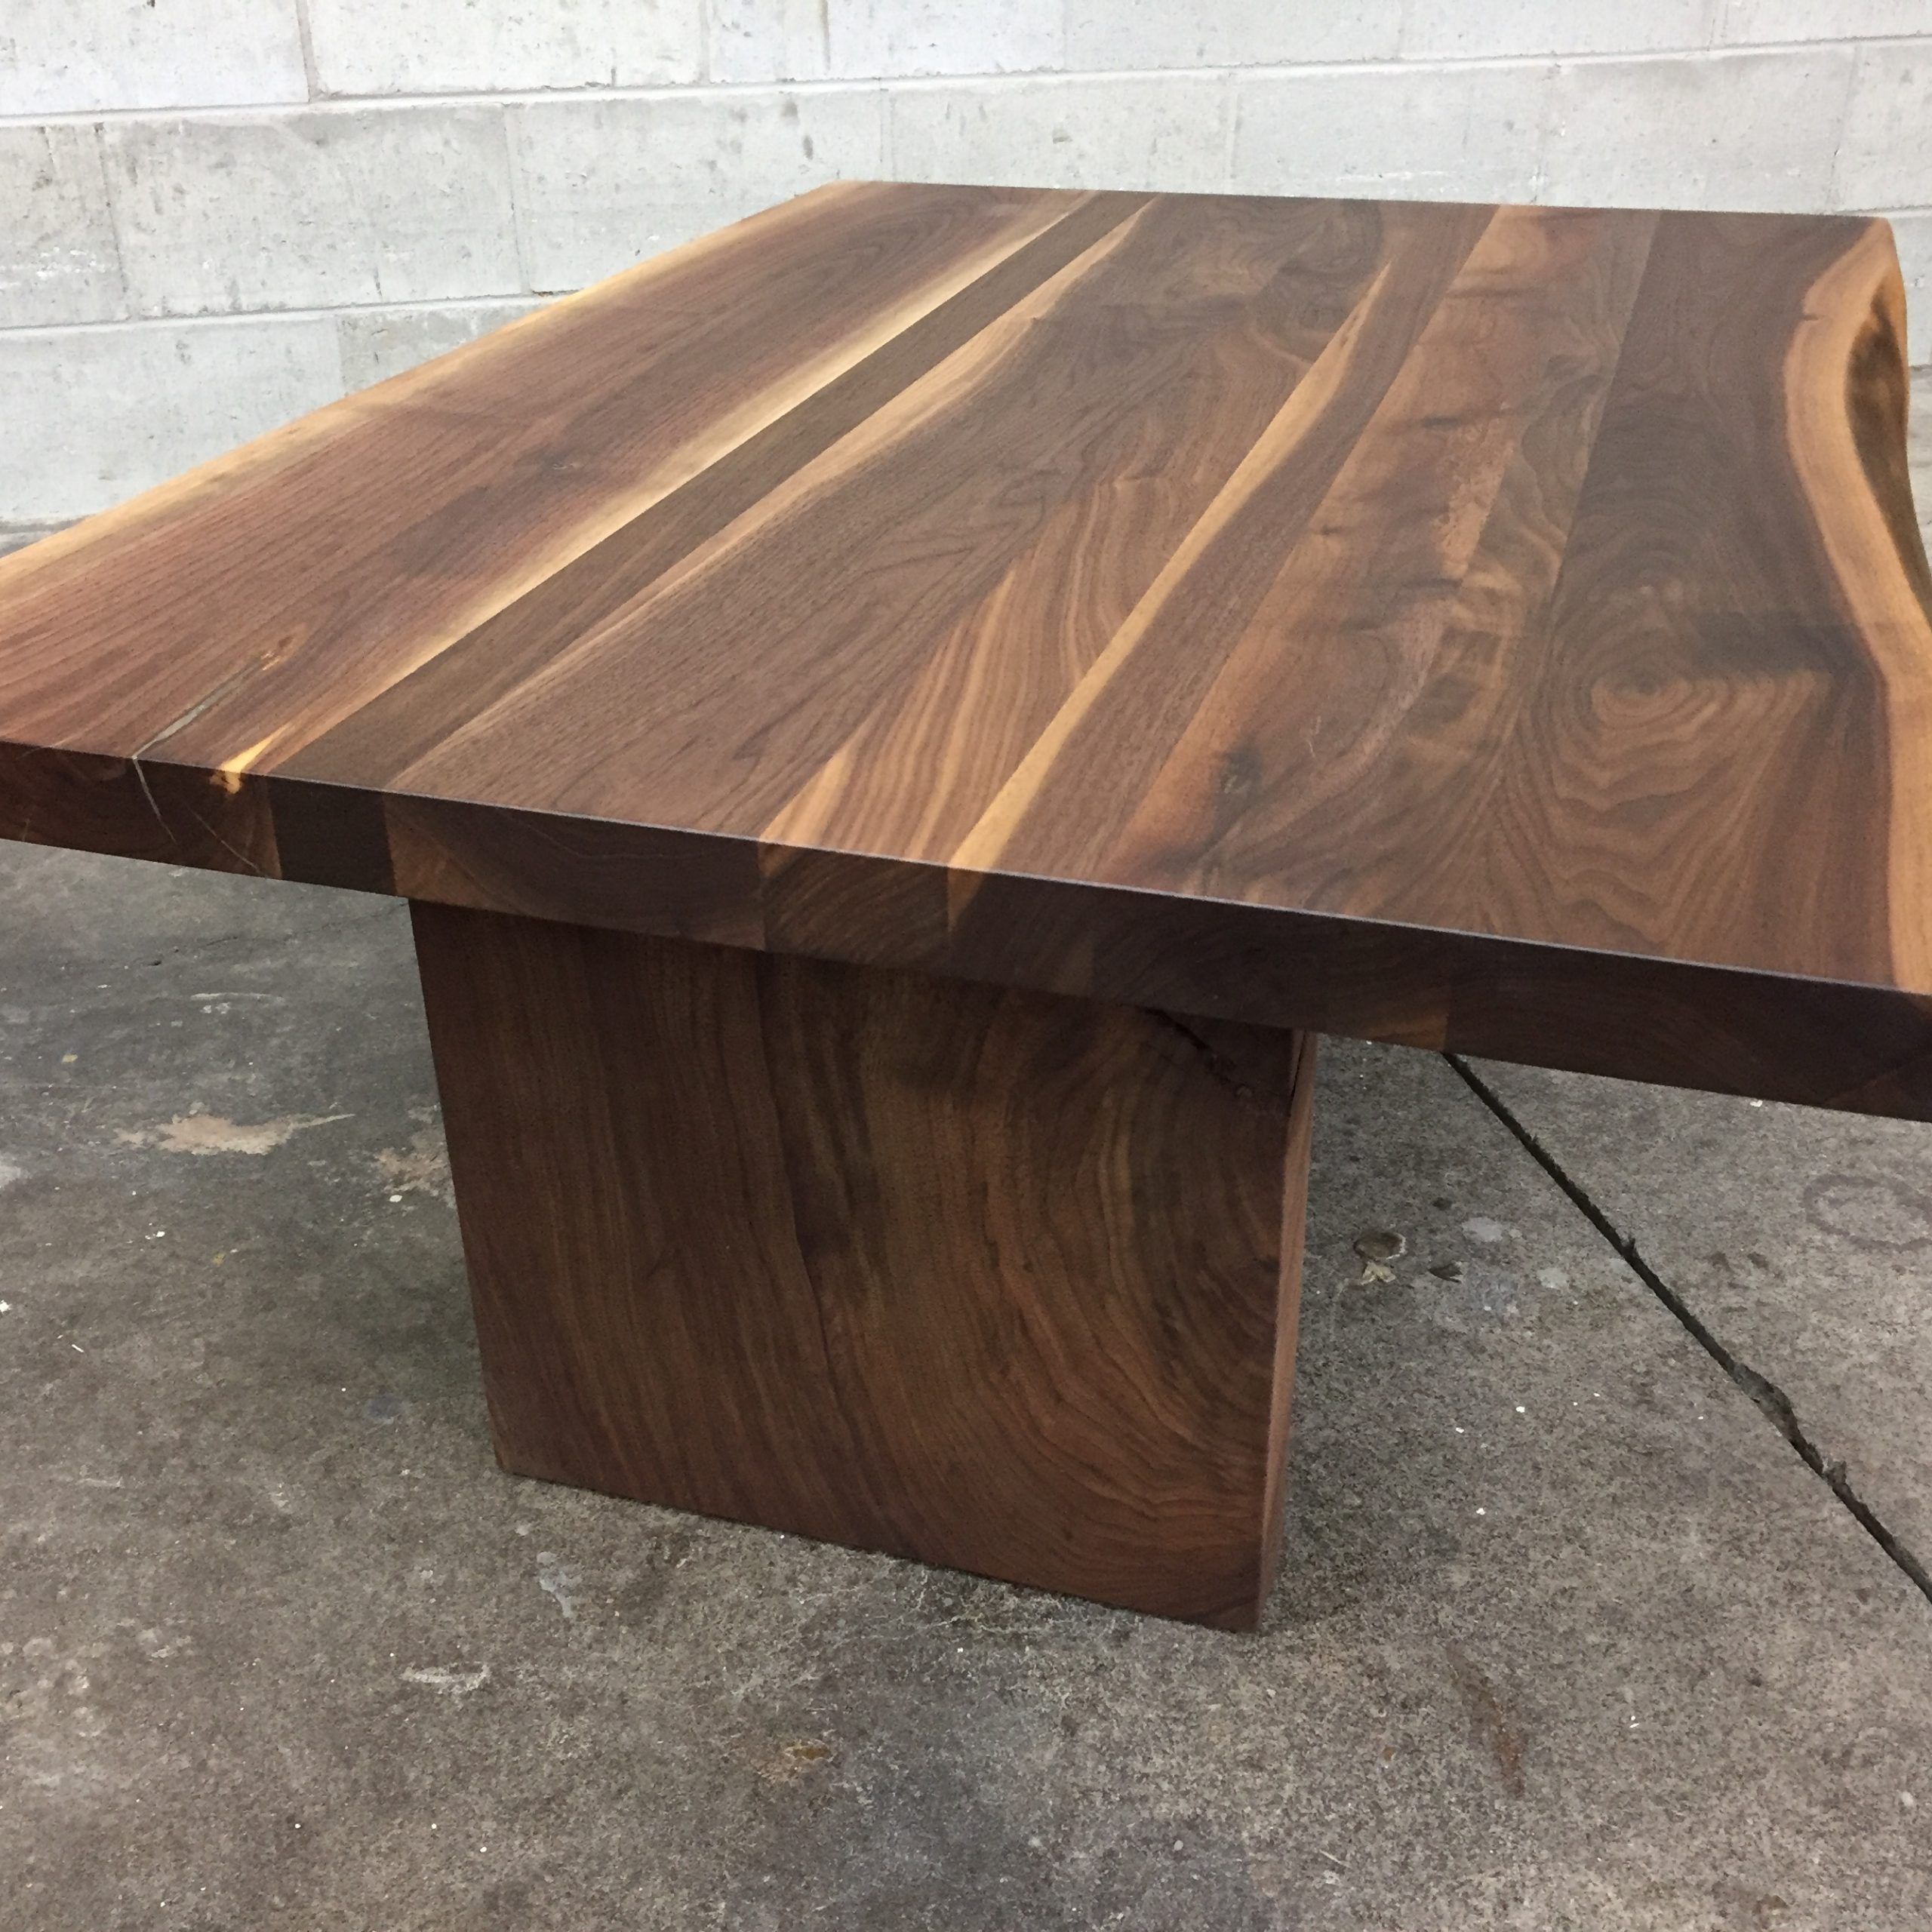 Laminated Live Edge Black Walnut Coffee Table – Solu With Regard To Walnut Wood And Gold Metal Coffee Tables (View 5 of 15)